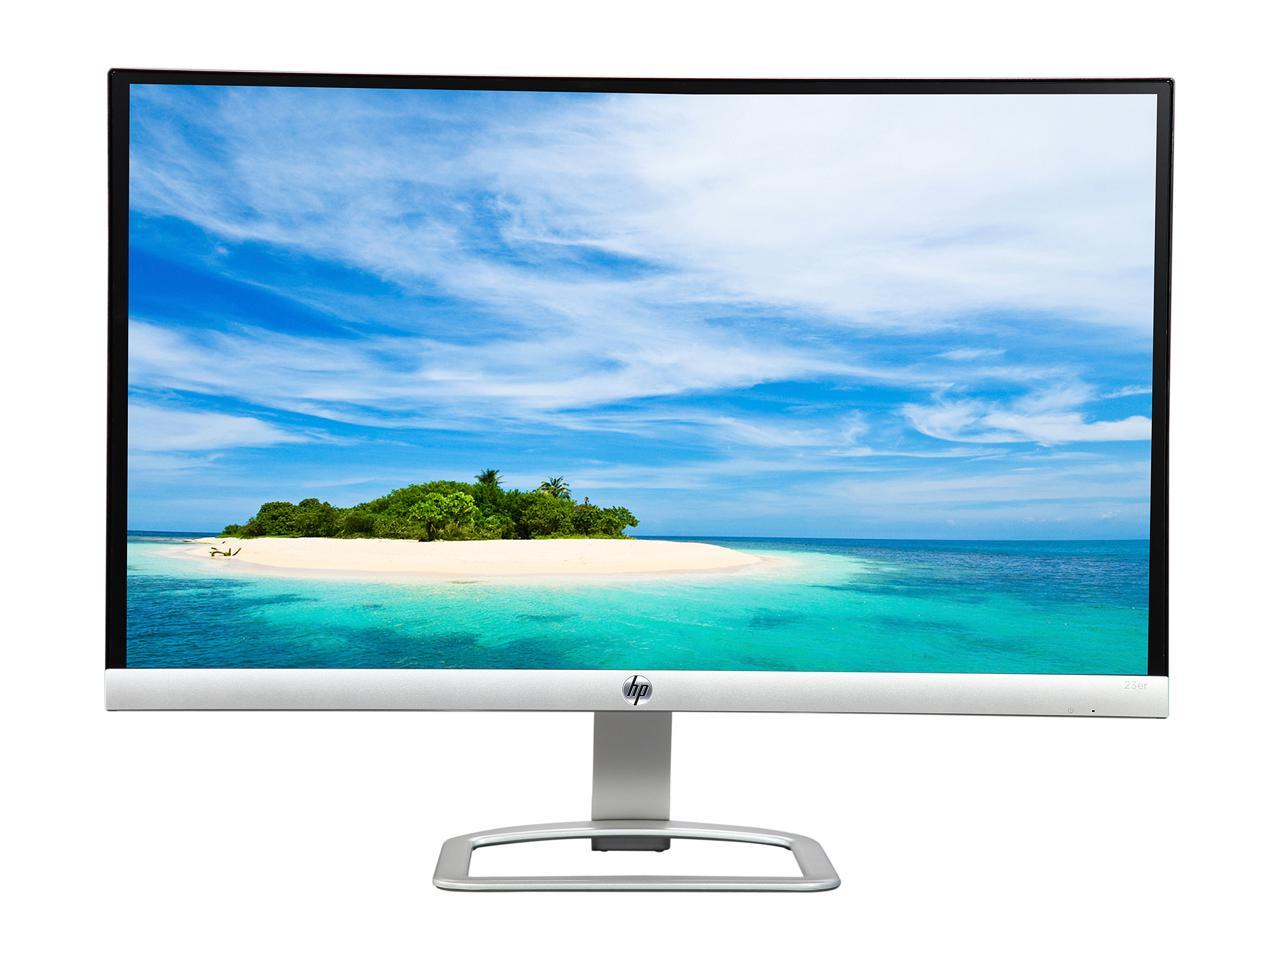 HP 23ER Frameless Silver/White 23" IPS Widescreen LCD/LED Monitors, HDMI 1920 x 1080 60 Hz, w/ Anti-Glare, Technicolor Color Certification with Easy Connectivity Setting, 178/178 Viewing Angle